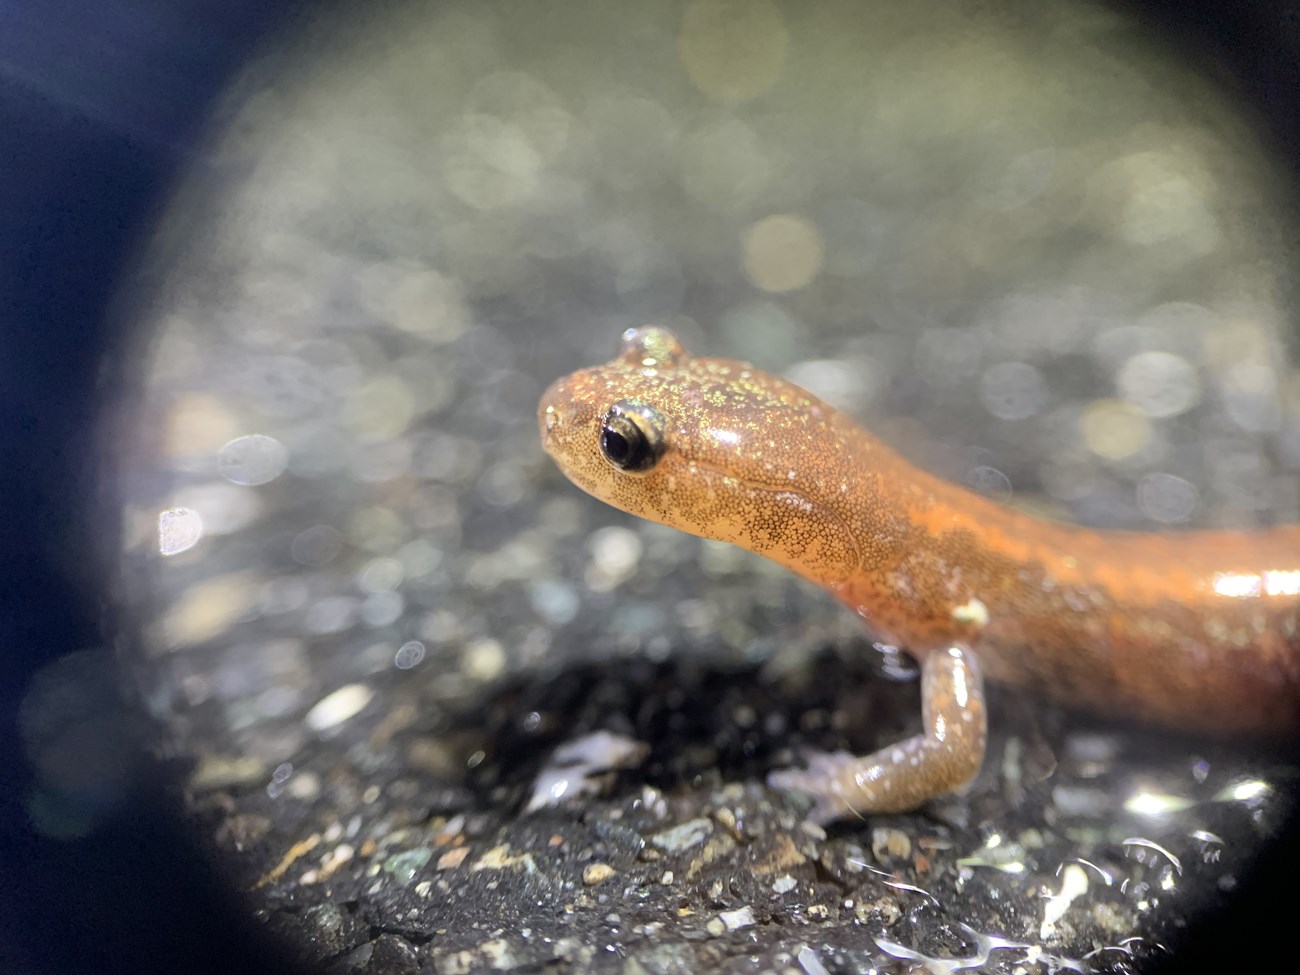 A macro image of a salamander with speckled gold skin